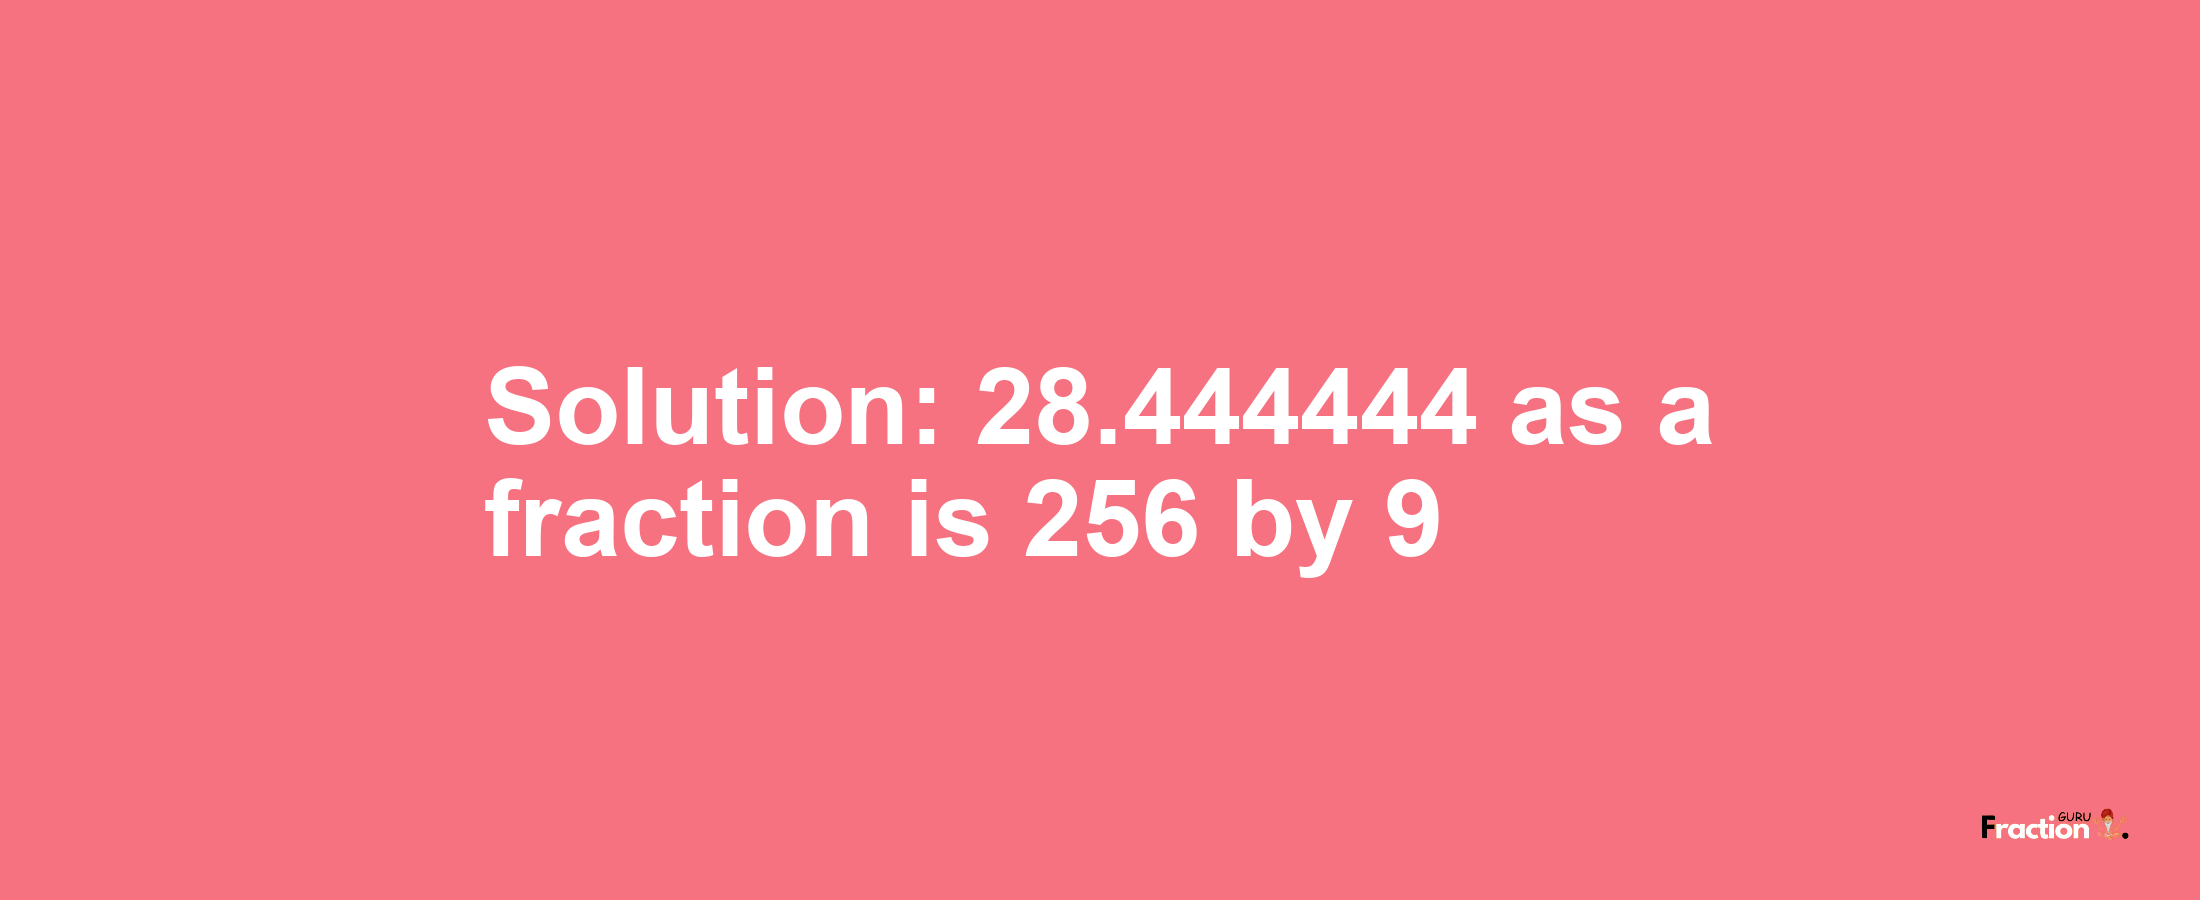 Solution:28.444444 as a fraction is 256/9